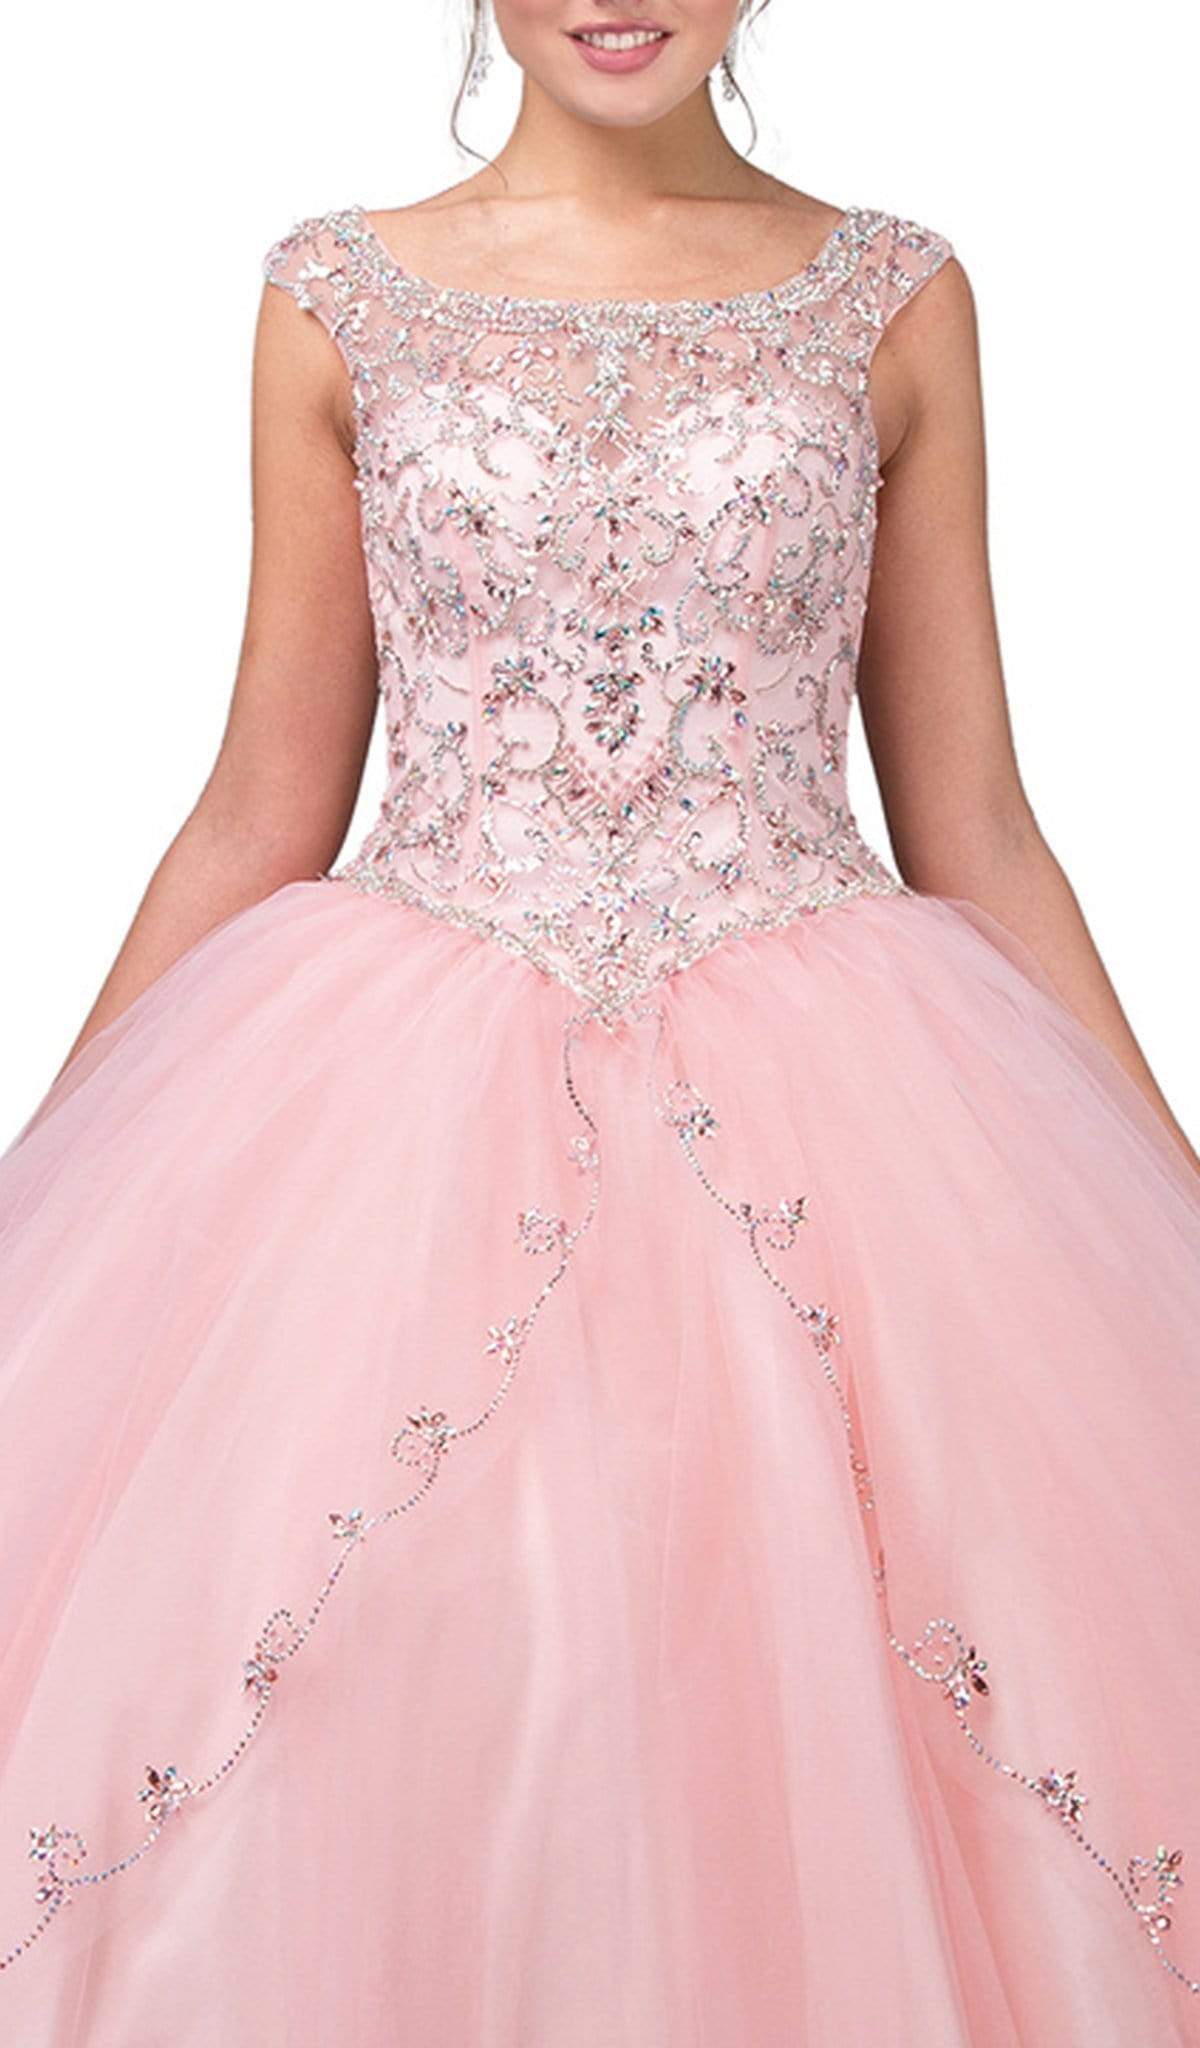 Dancing Queen - 1267 Cap Sleeves Embellished Quinceanera Ballgown Special Occasion Dress S / Blush